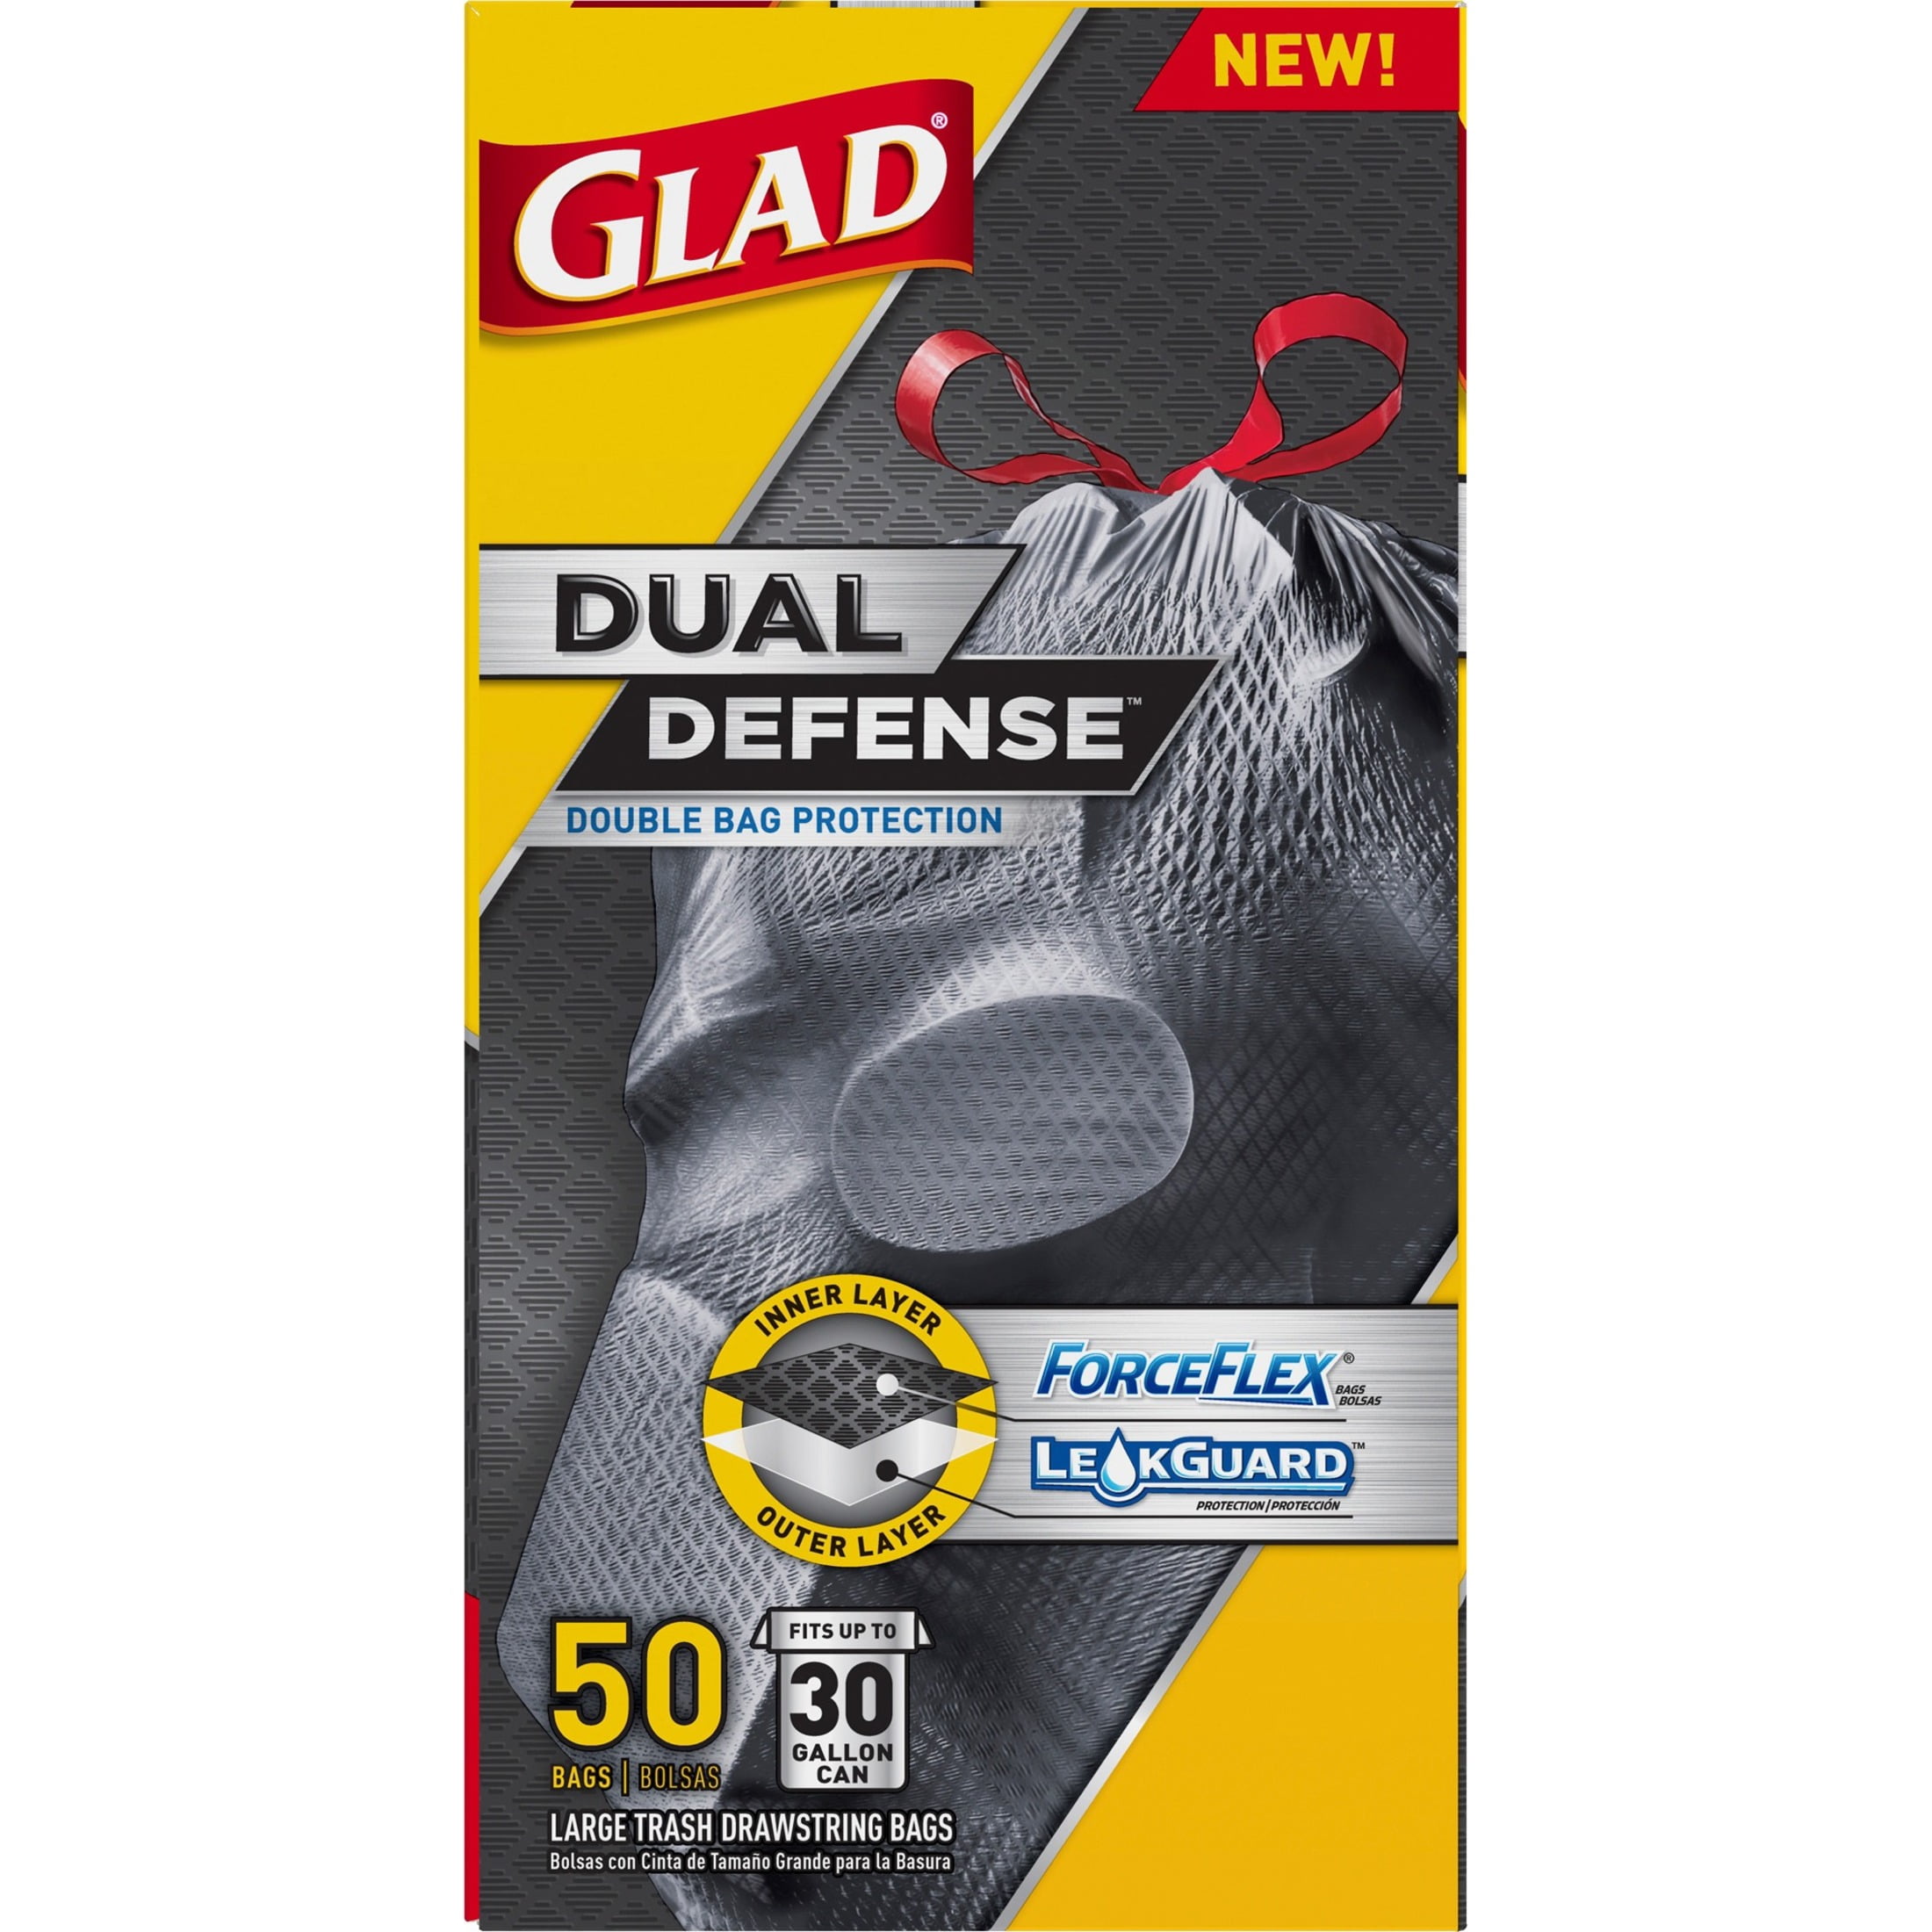 Glad ForceFlexPlus Large Drawstring Trash Bags - Large Size - 30 gal  Capacity - 0.90 mil (23 Micron) Thickness - Black - 6/Carton - 25 Per Box -  Home, Office, Can - Filo CleanTech